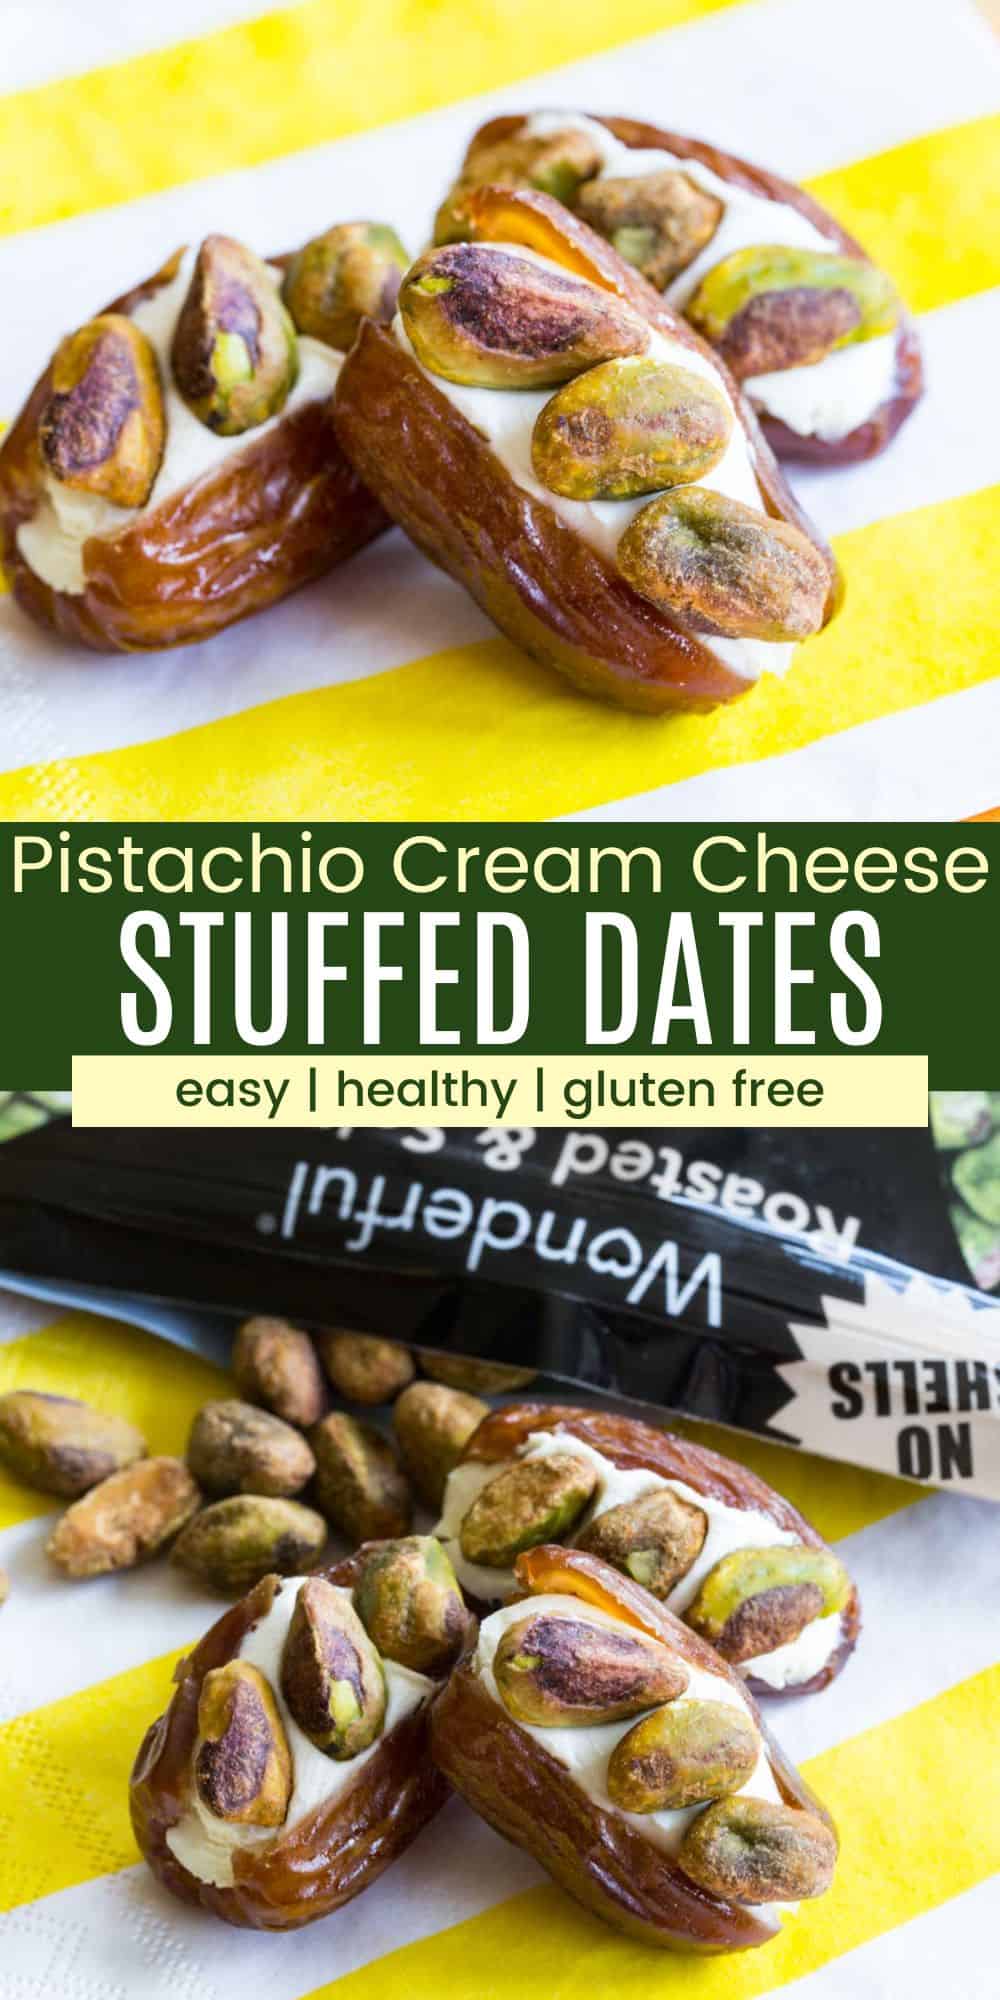 Pistachio Cream Cheese Stuffed Dates - an easy snack recipe with only three ingredients. A simple lunchbox or after school snack, or serve on a fruit and cheese platter for a party appetizer.